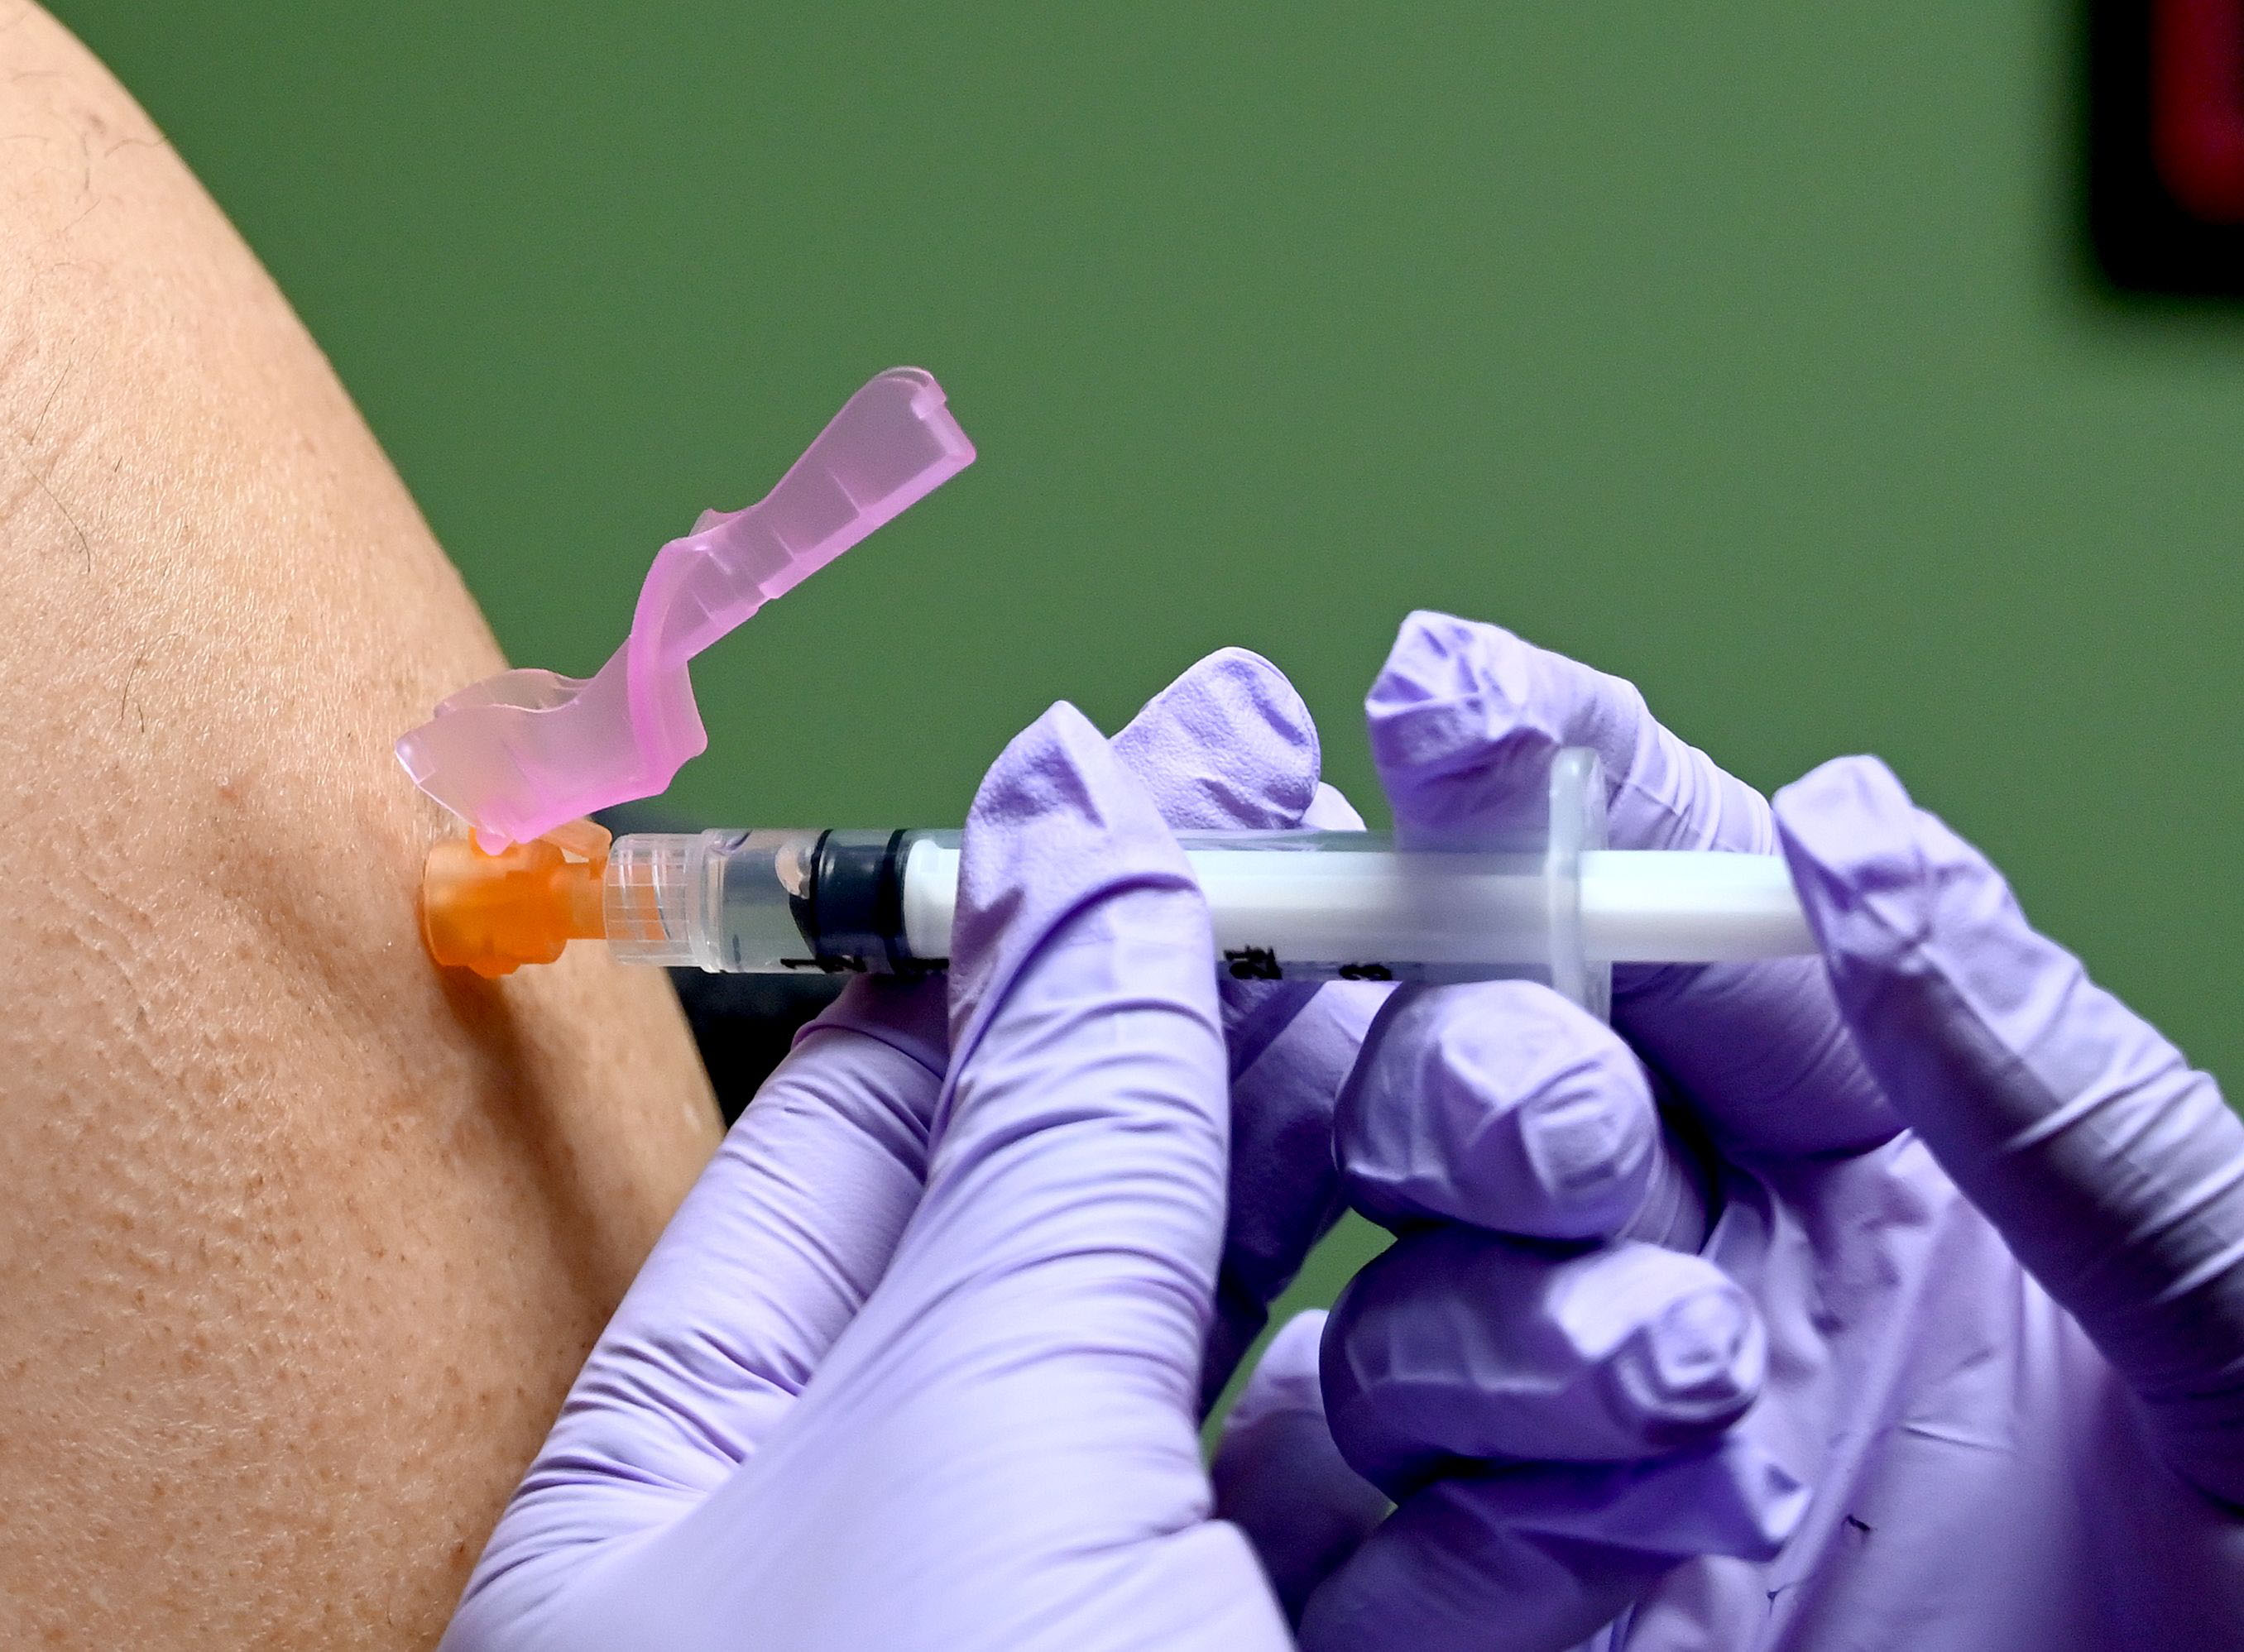 A person gets a flu shot at a health facility in Washington, DC, on January 31.